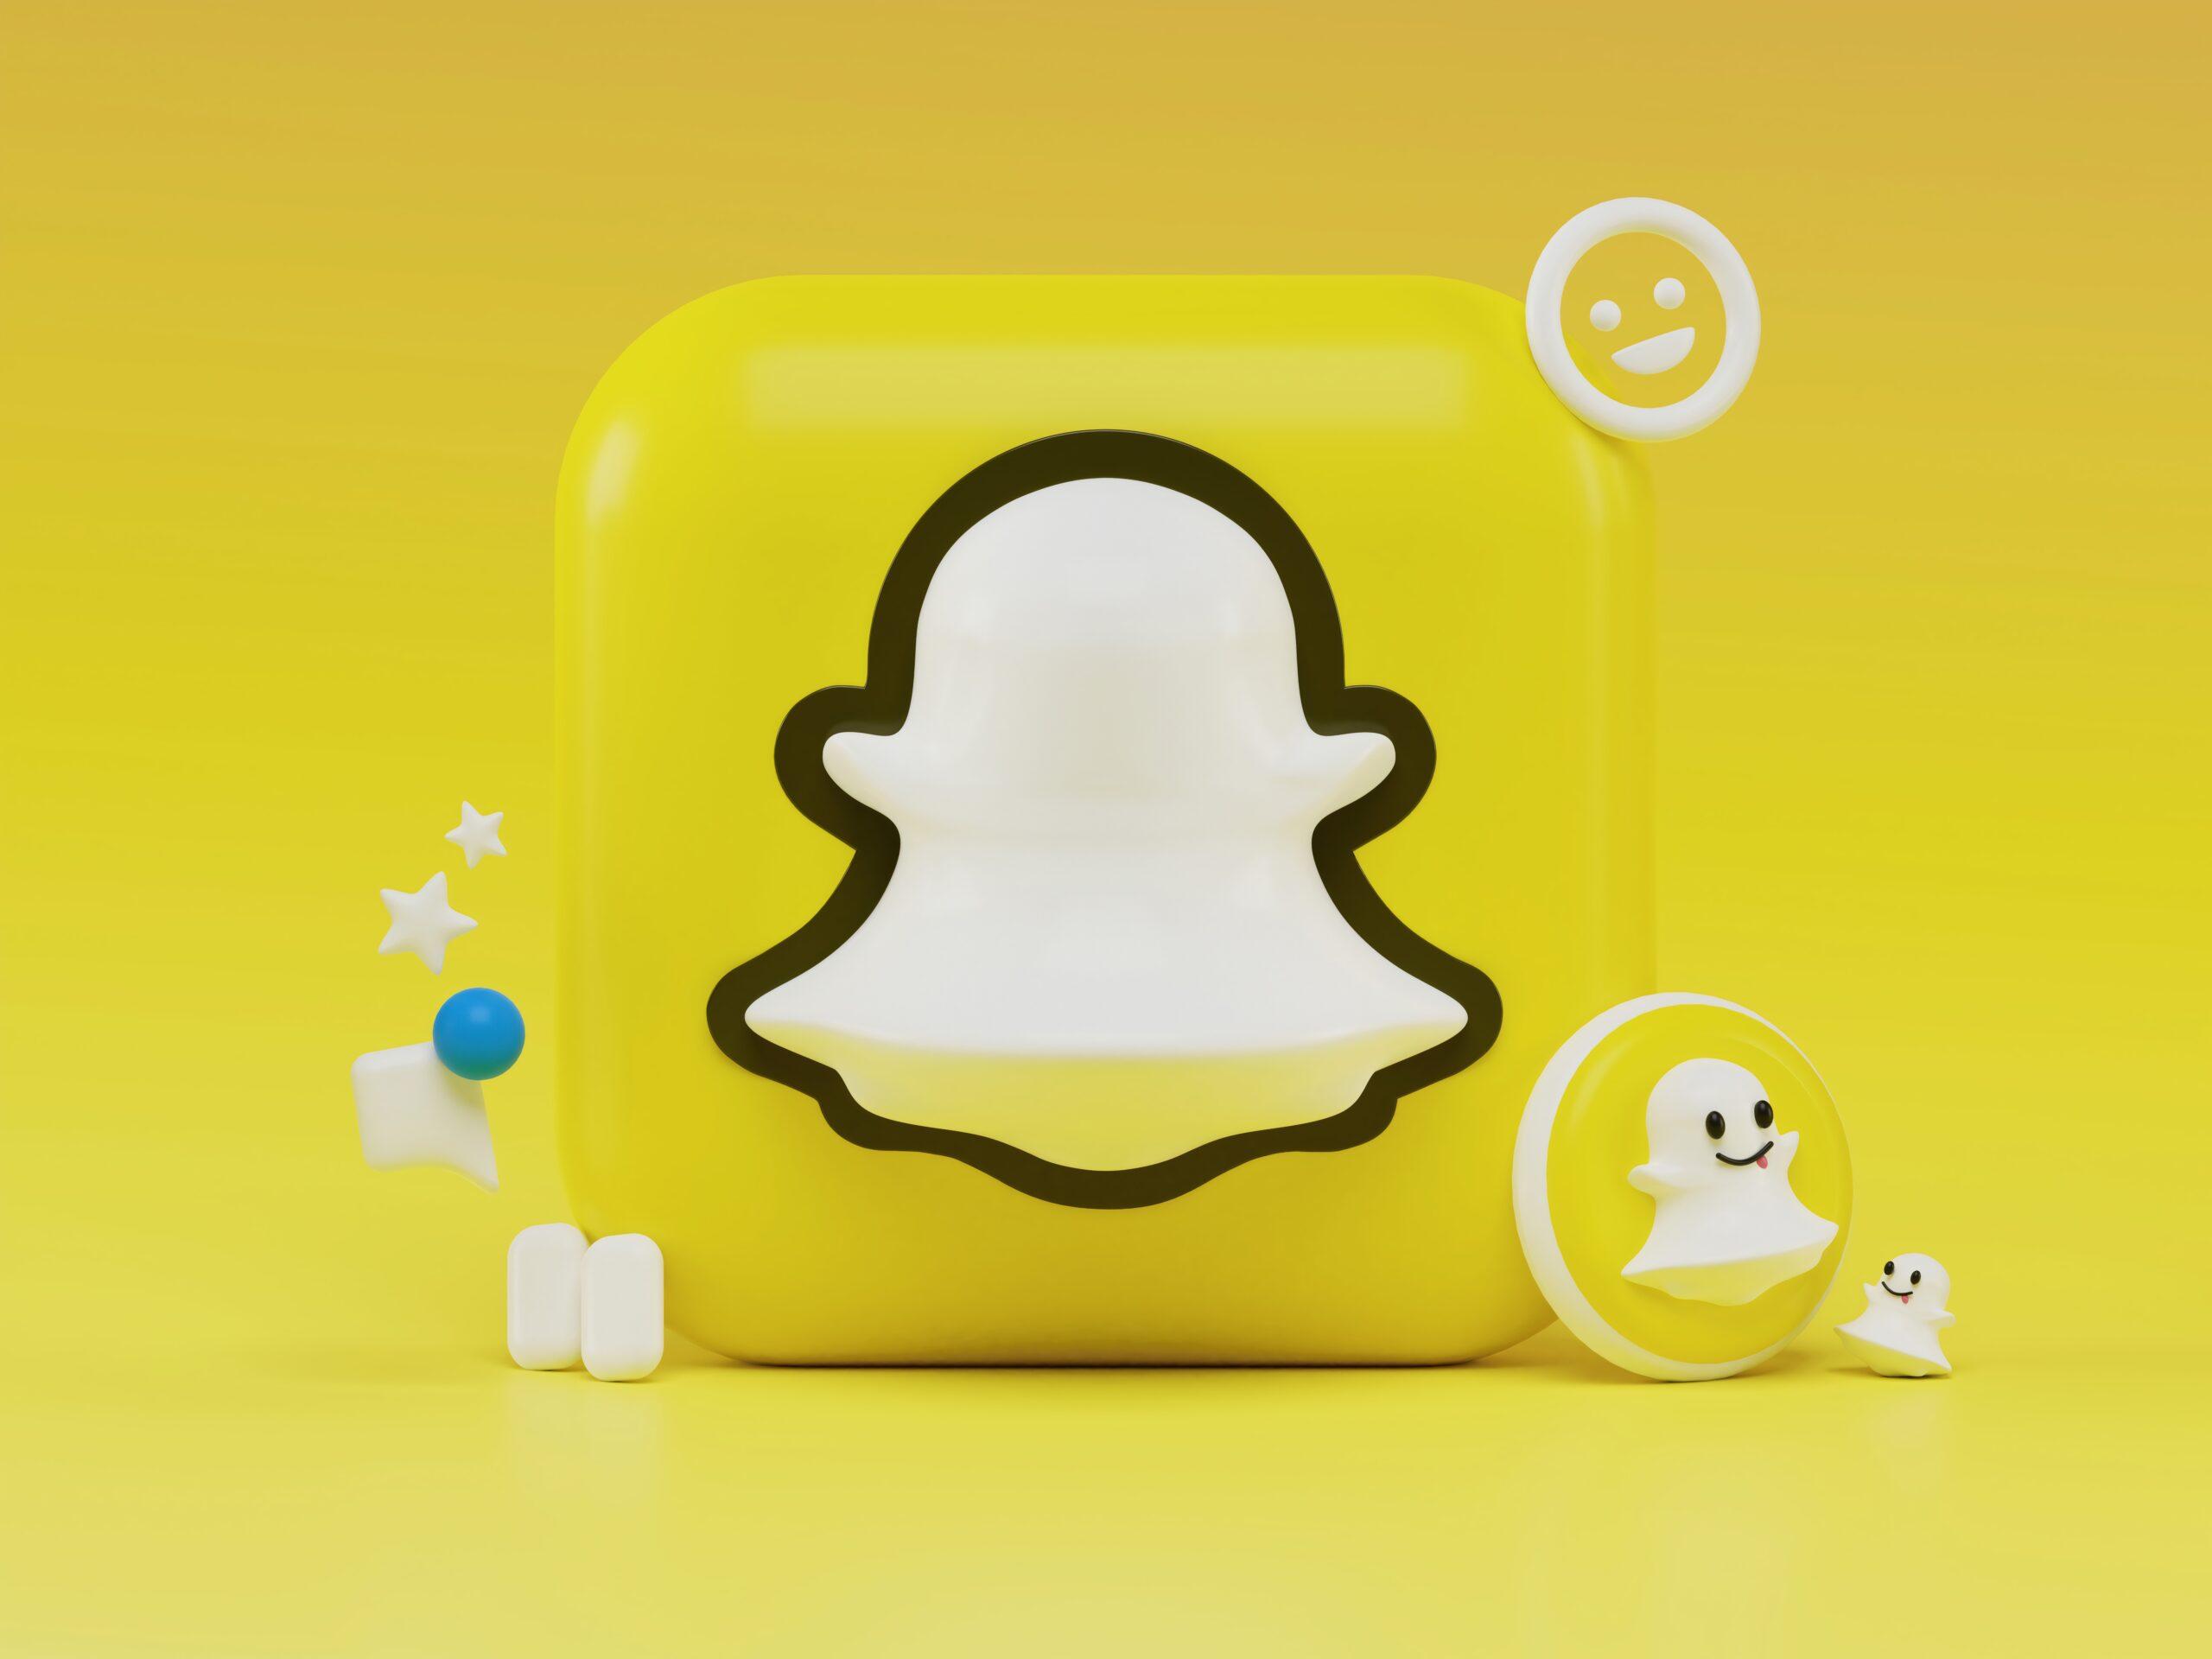 How to Add Music to Snapchat Story | The Detailed Guide